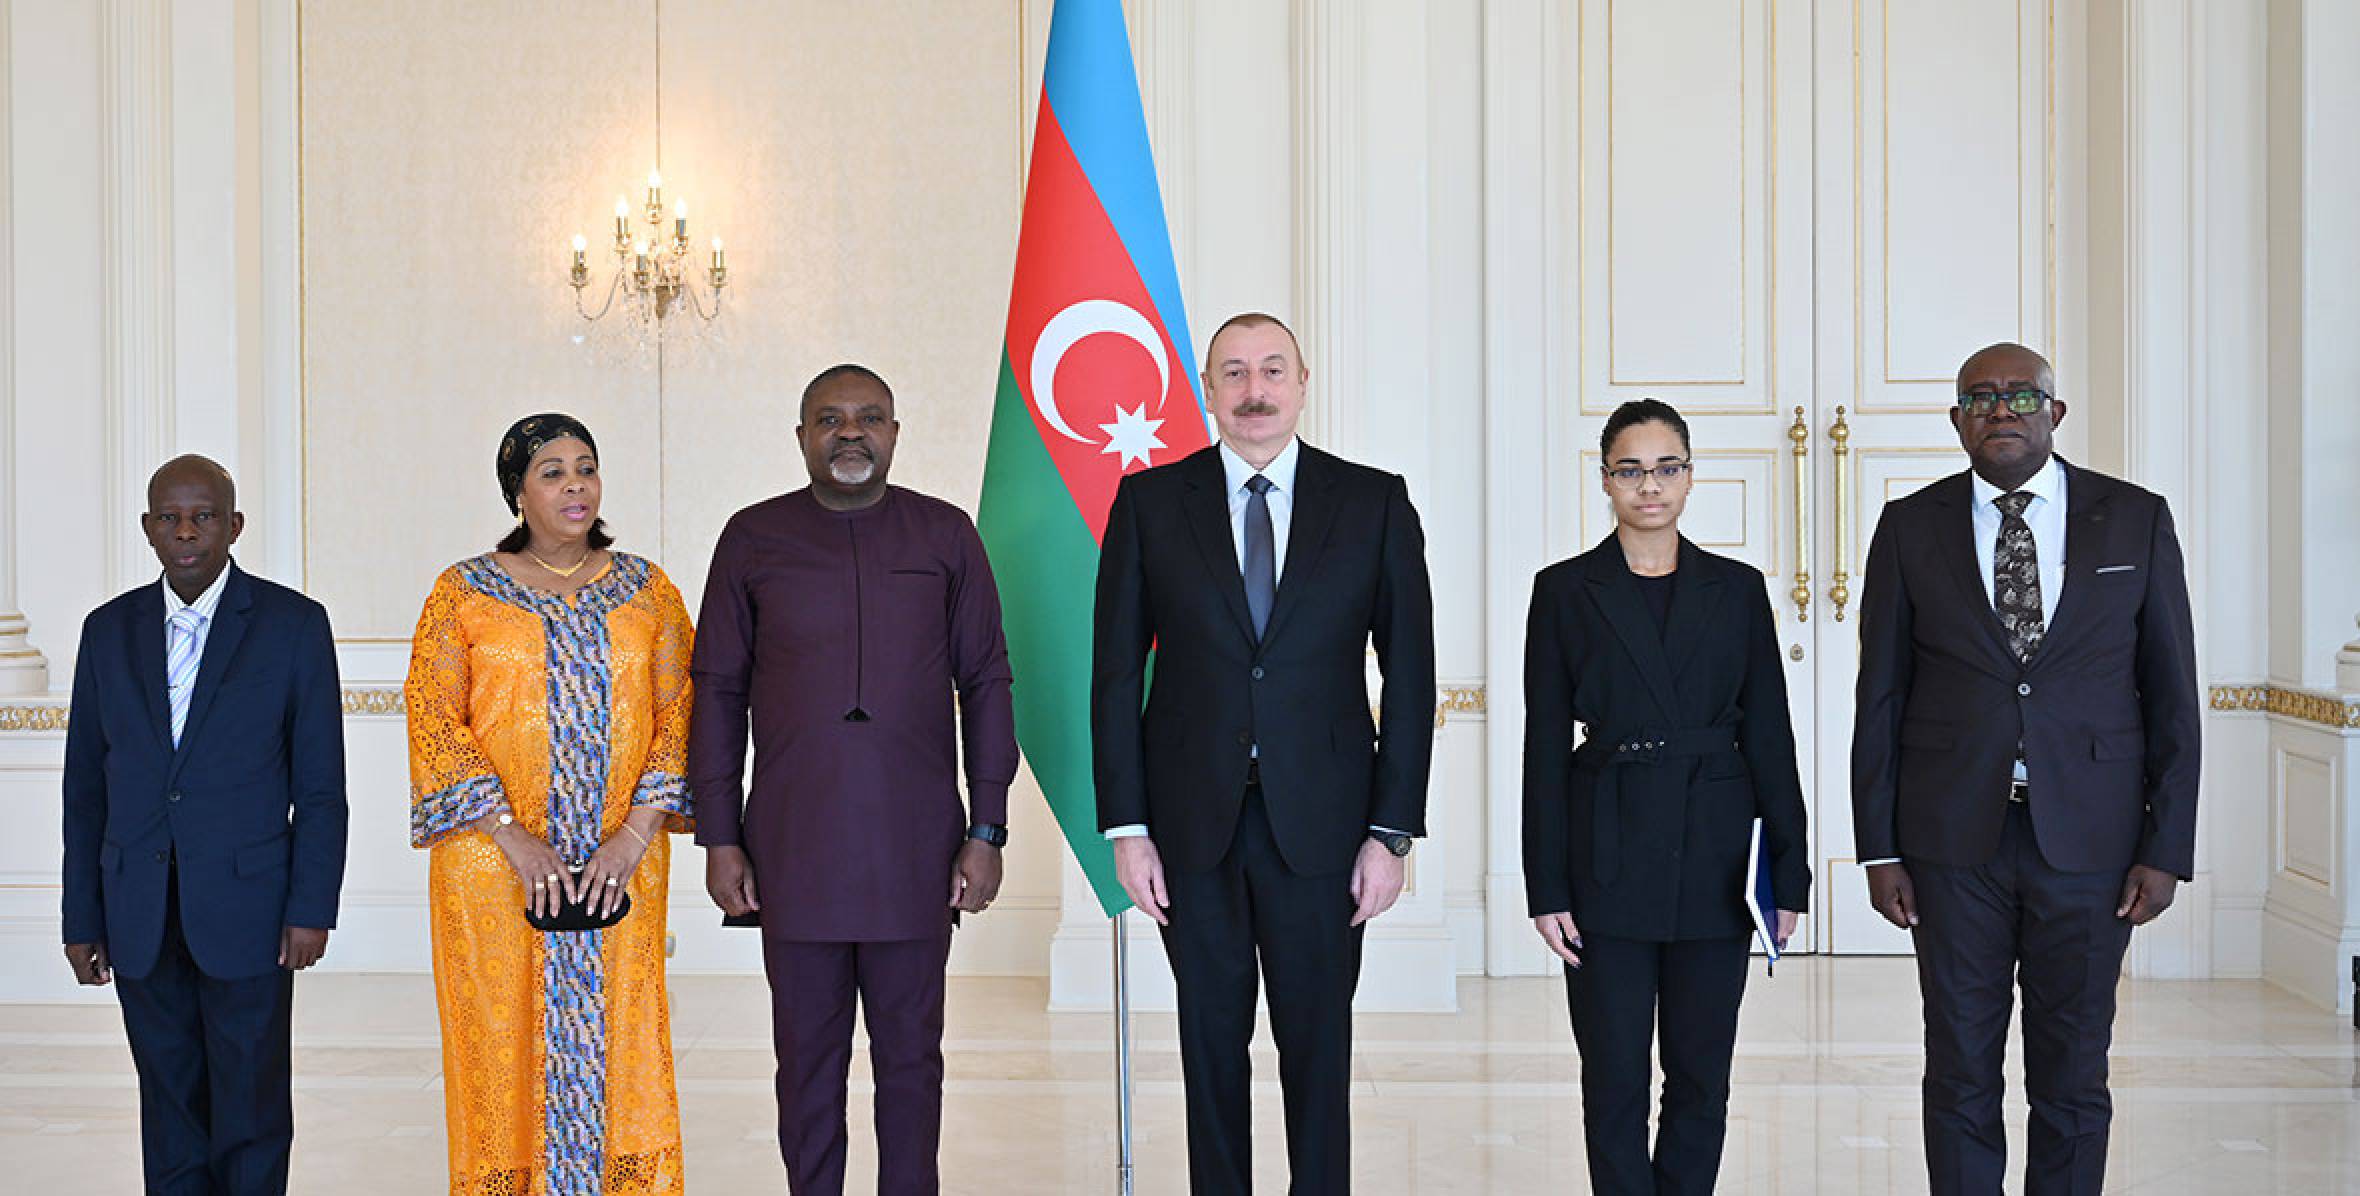 Ilham Aliyev accepted credentials of incoming ambassador of Angola